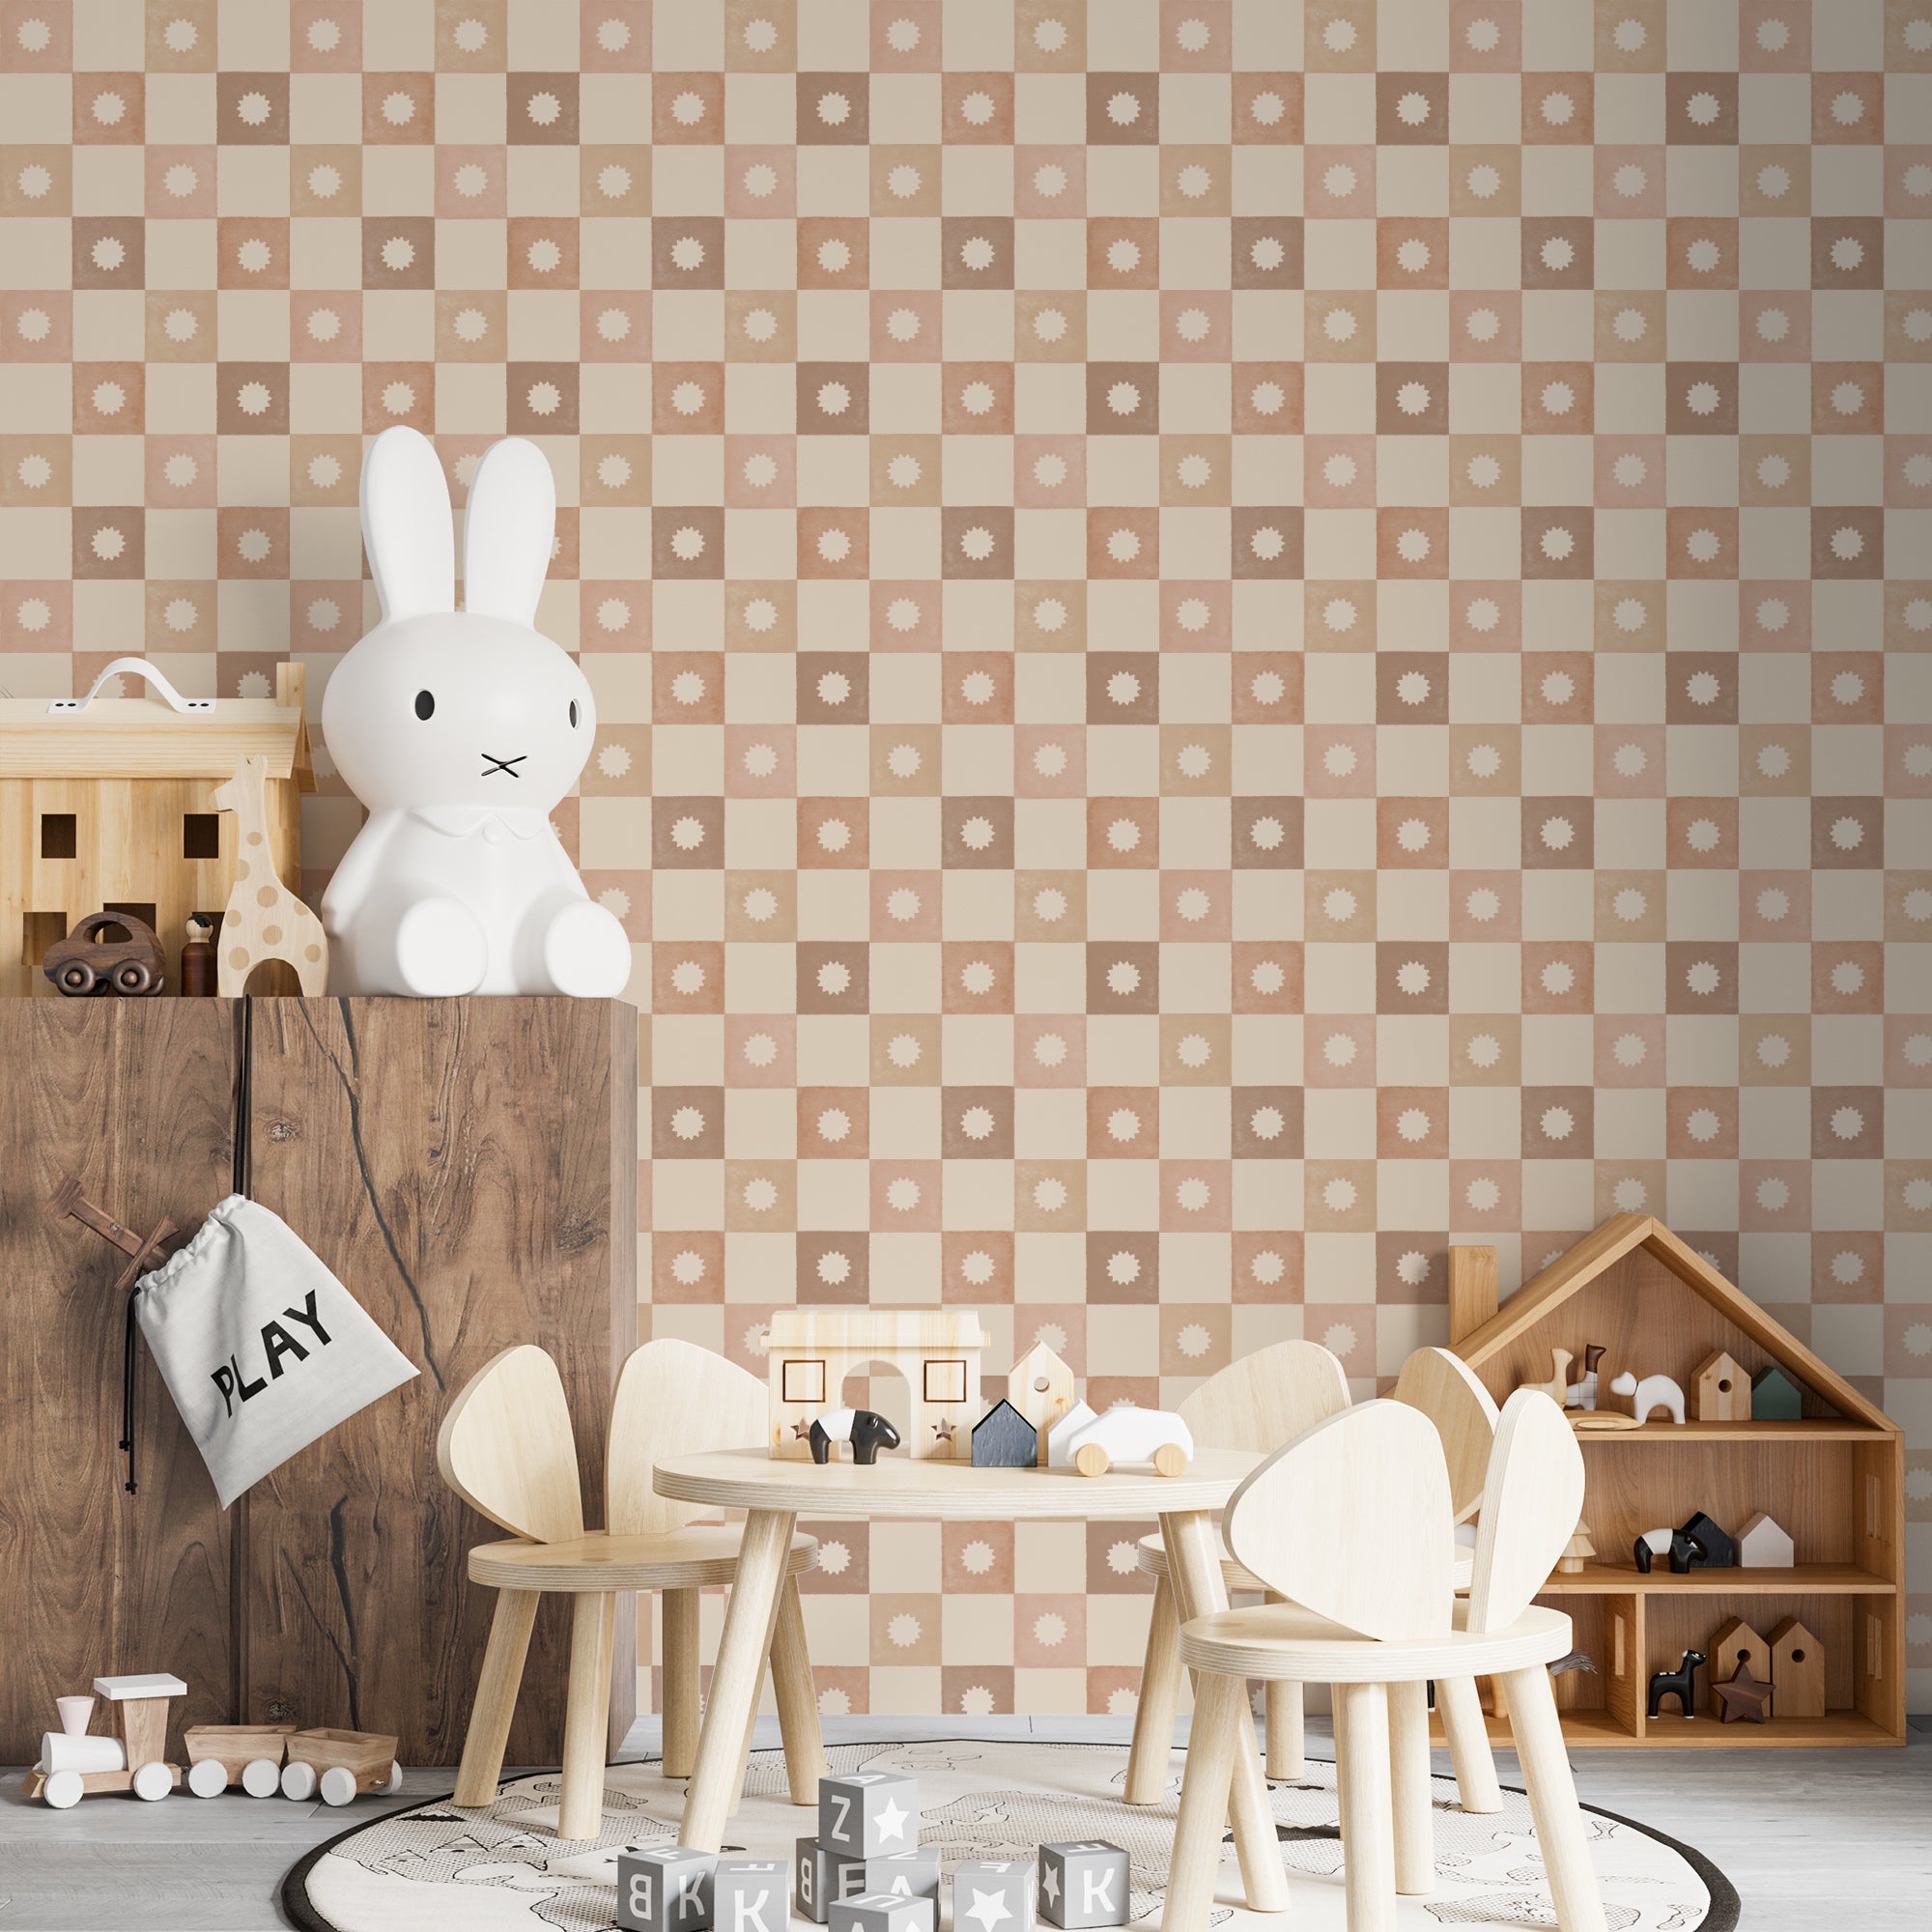 A children’s playroom wall covered with Marie Wallpaper, showcasing a pastel checkered pattern with white starburst designs in each square. The room is decorated with a wooden toy storage unit and minimalist children's furniture, enhancing the playful and creative environment